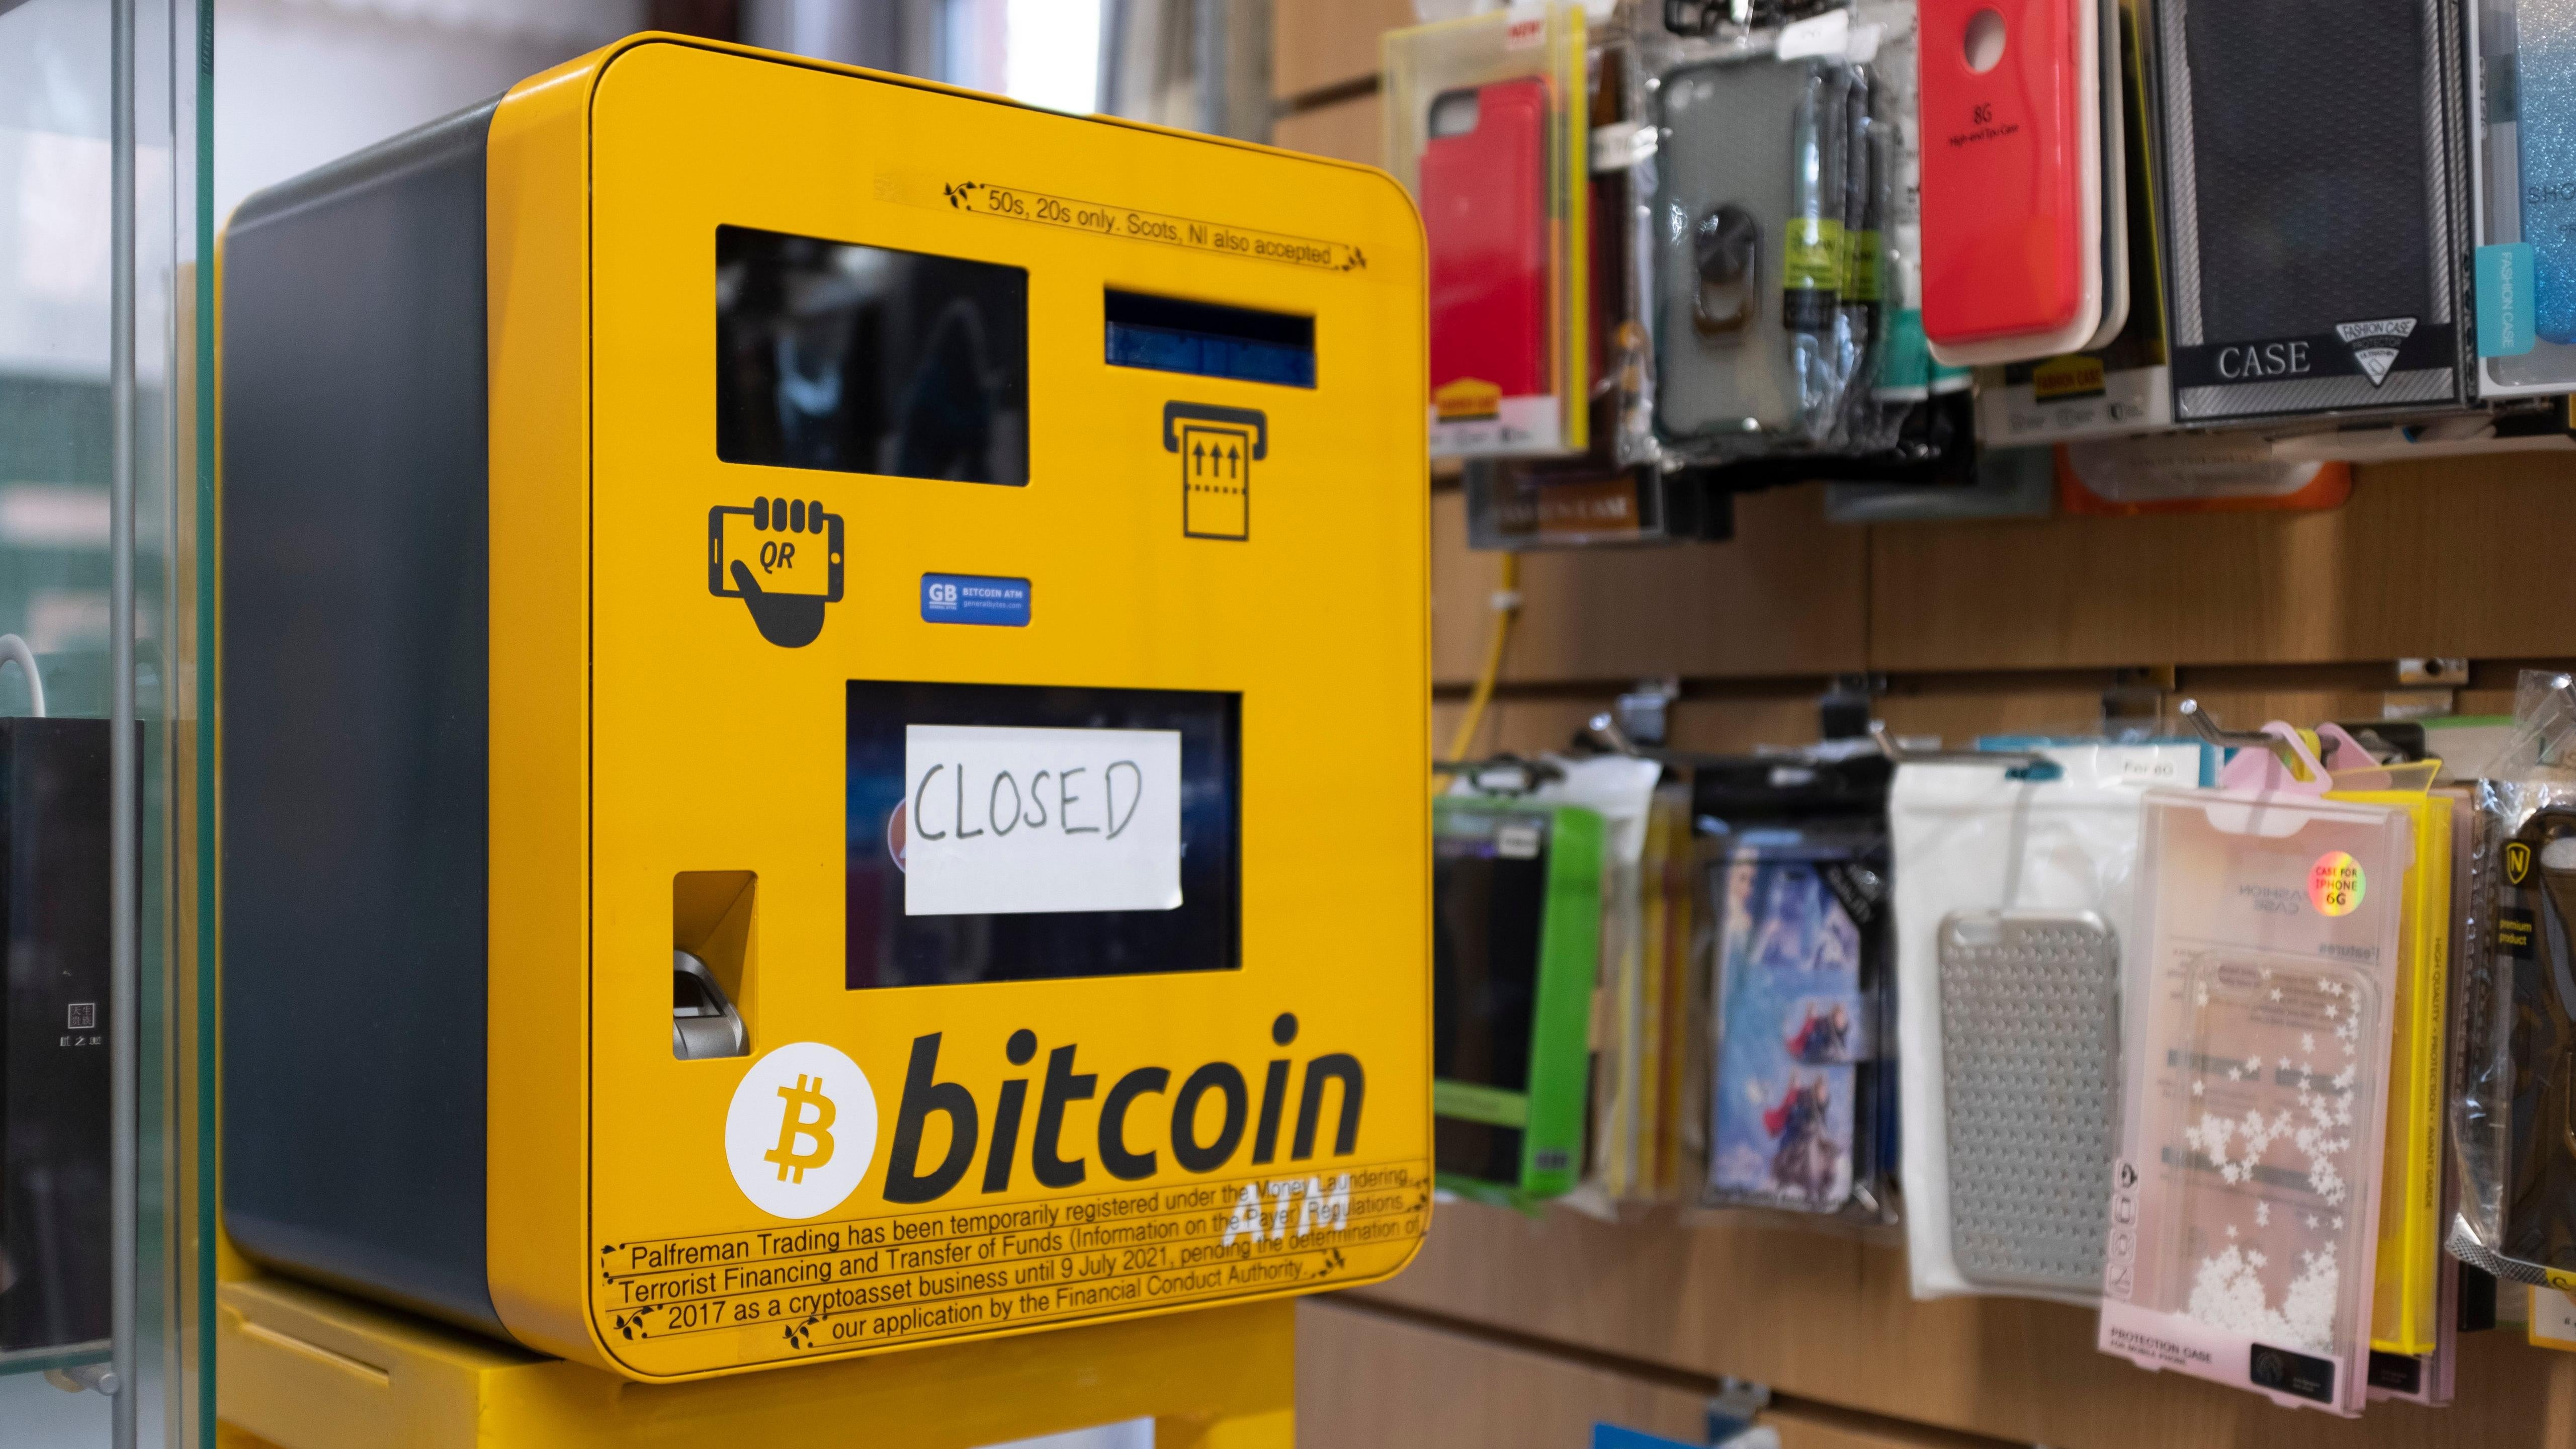 Bitcoin ATMs Declared Illegal in UK by Financial Regulator